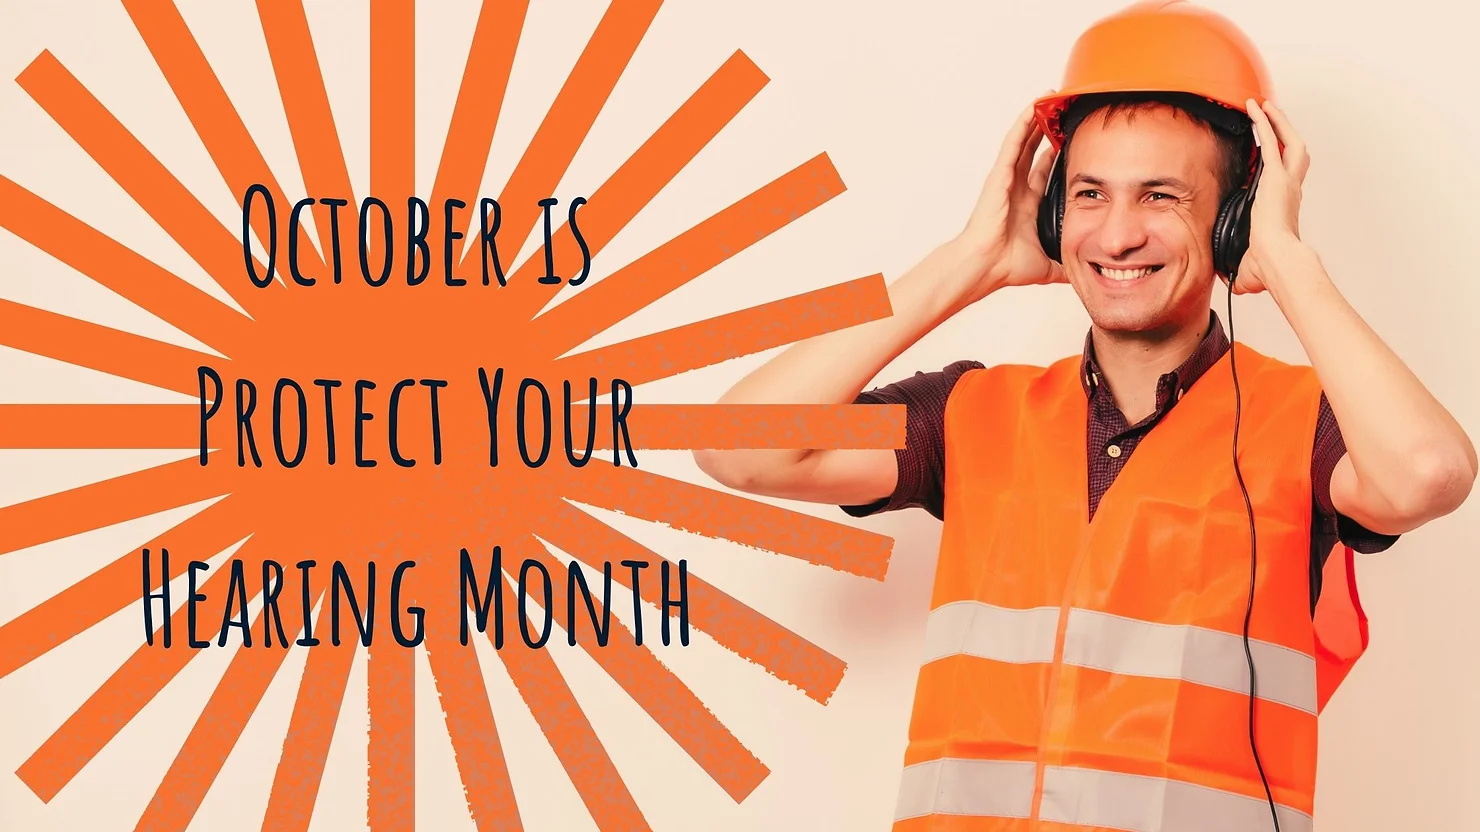 Featured image for “October is Protect Your Hearing Month”